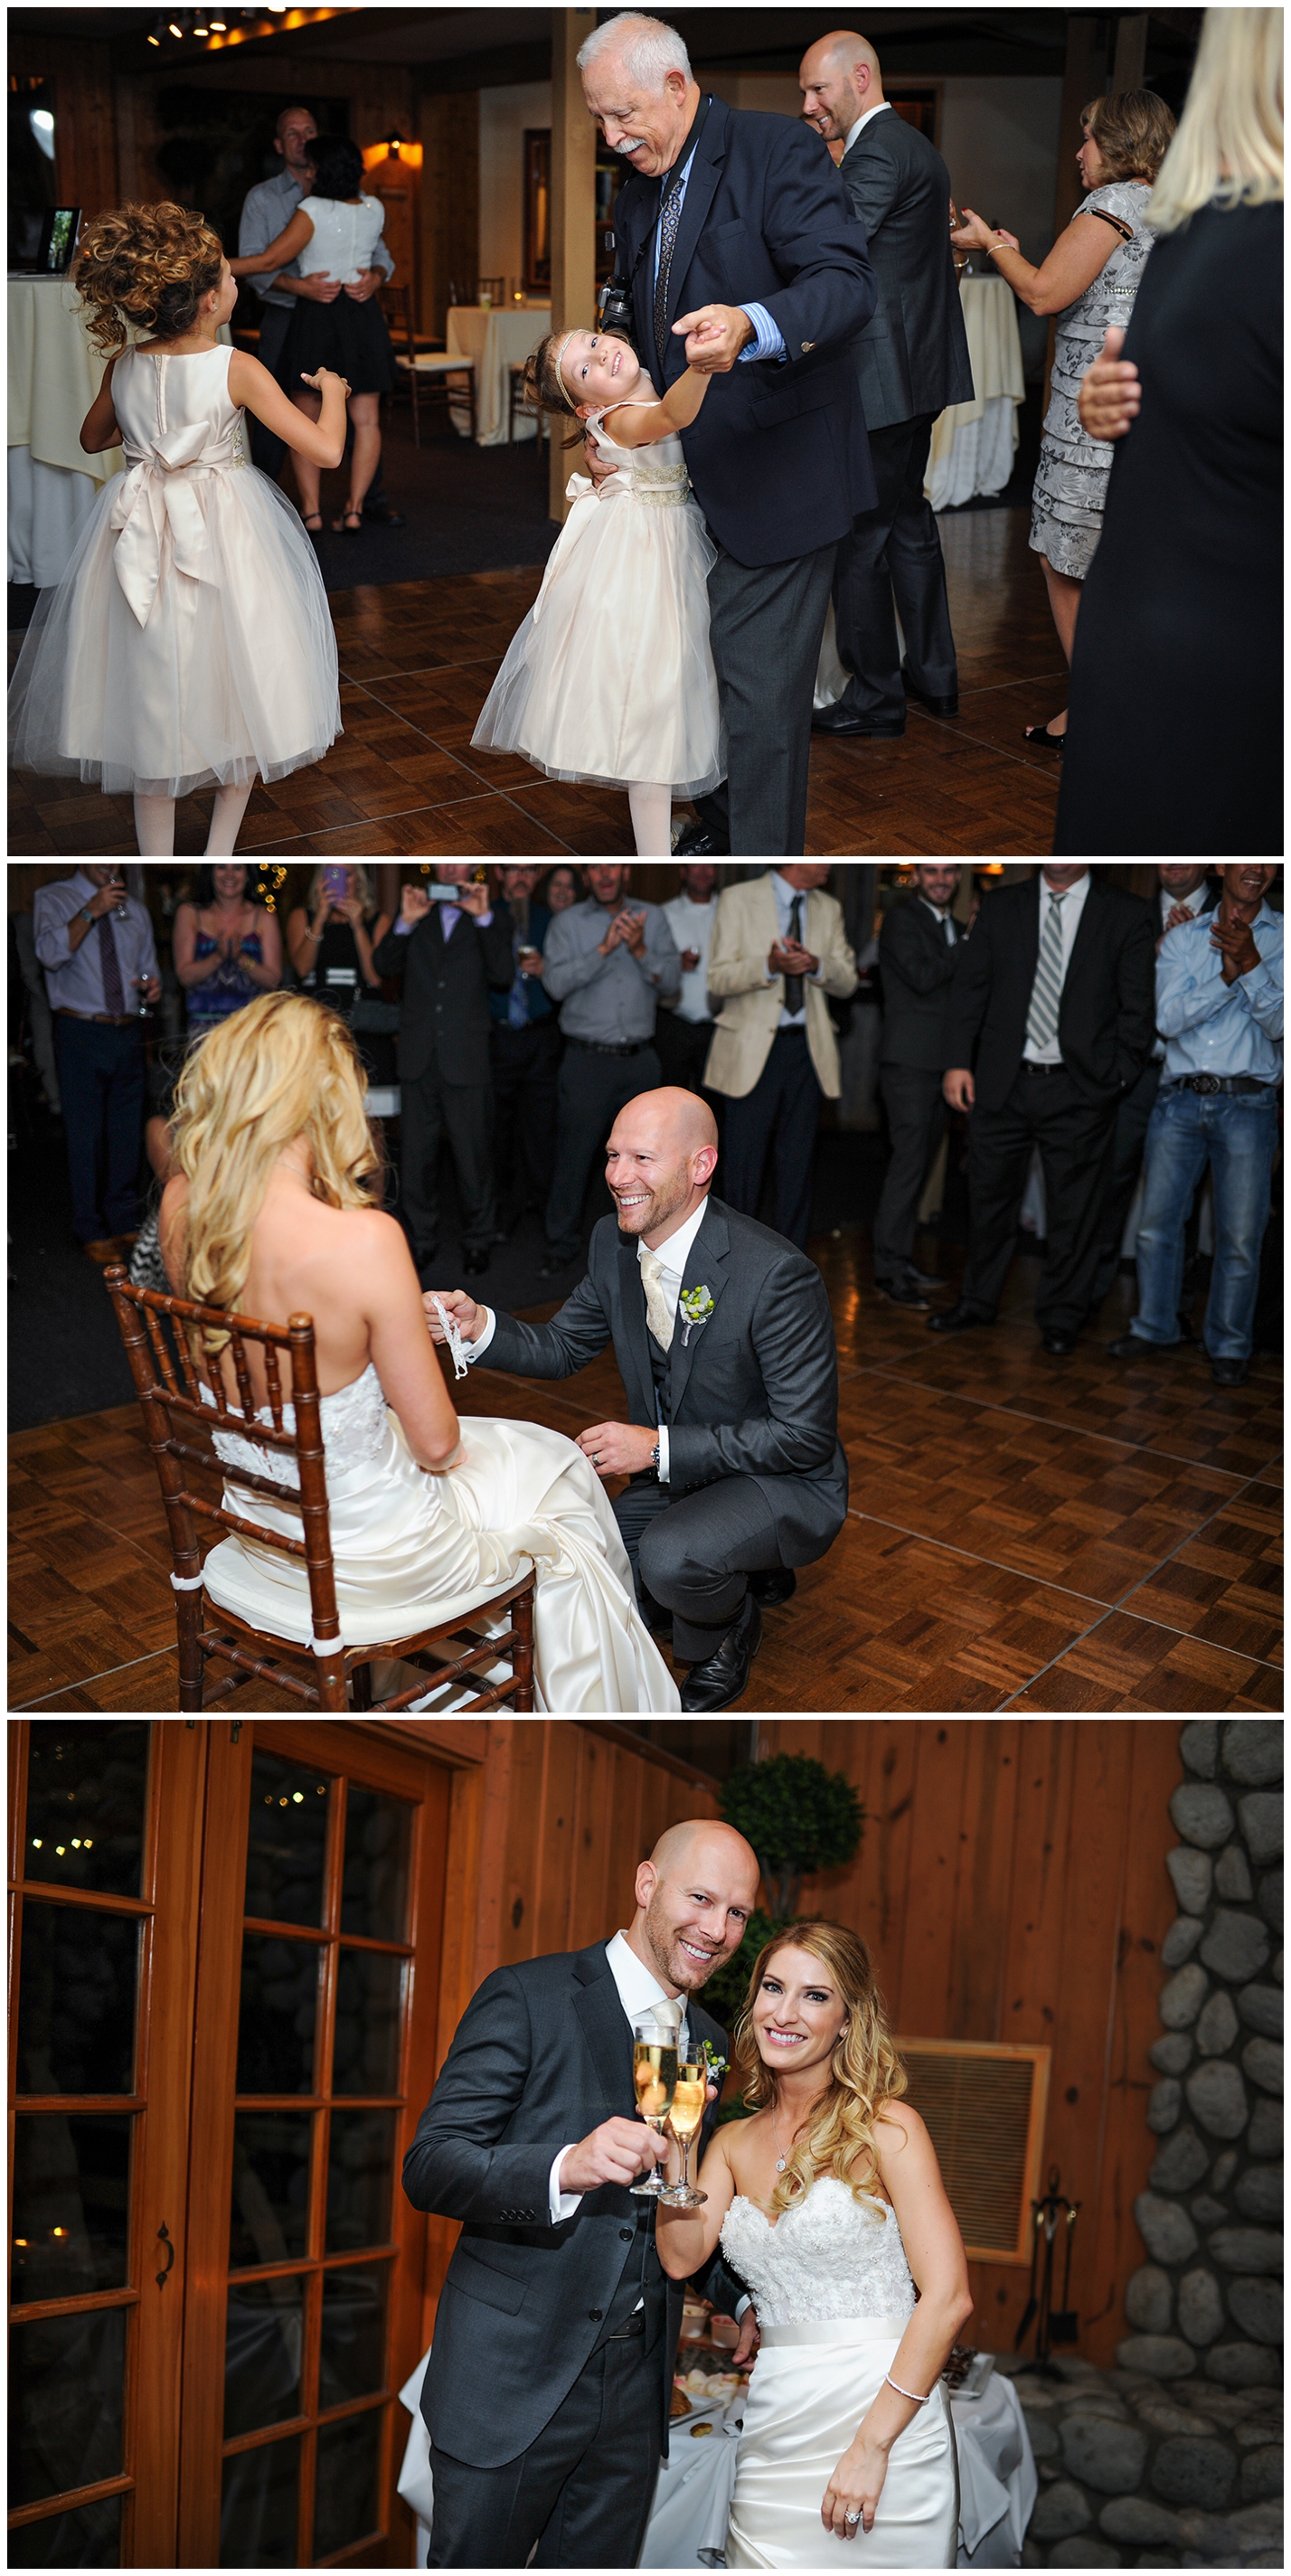 beautiful-calamigos-ranch-wedding-at-the-oaks-wil-and-jessica